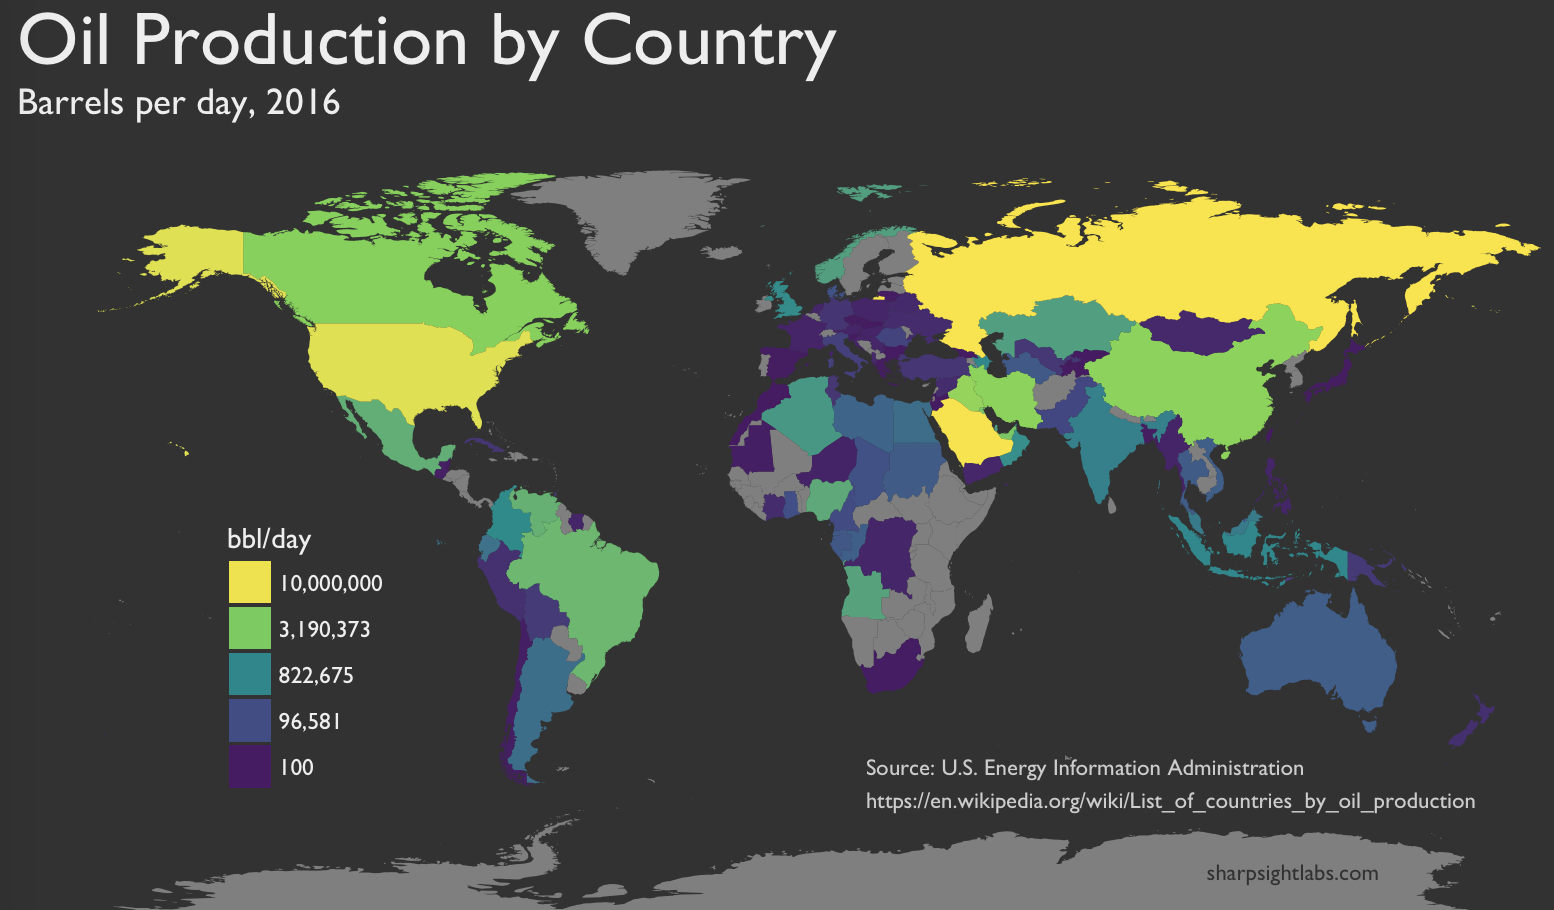 Oil Production by Country. World Oil Map. ОПЕК на карте. Страны ОПЕК на карте. Transforming countries